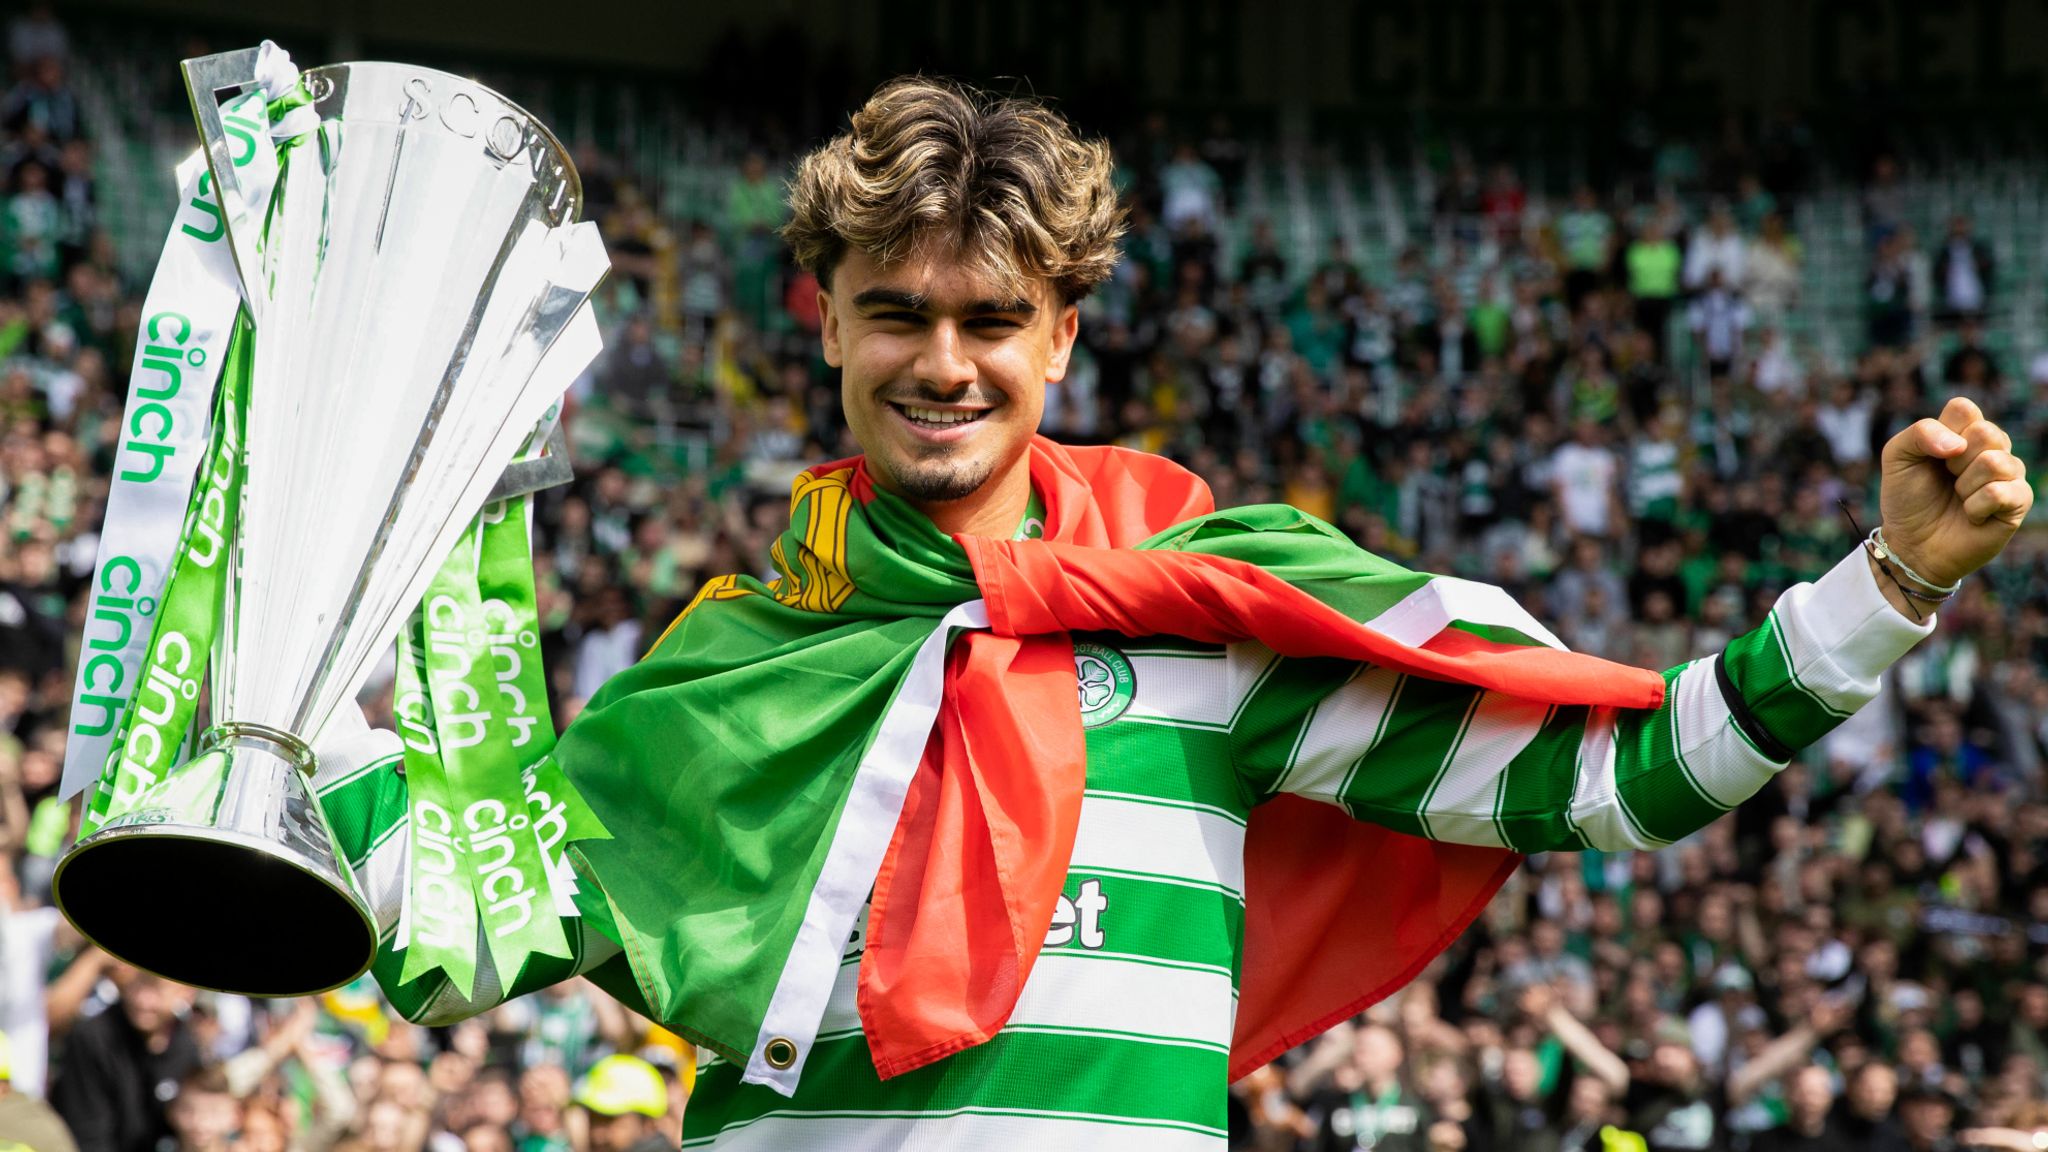 Celtic: Jota Close To Joining In Permanent Deal; Man City Duo Ko Itakura And Taylor Harwood Bellis Being Monitored